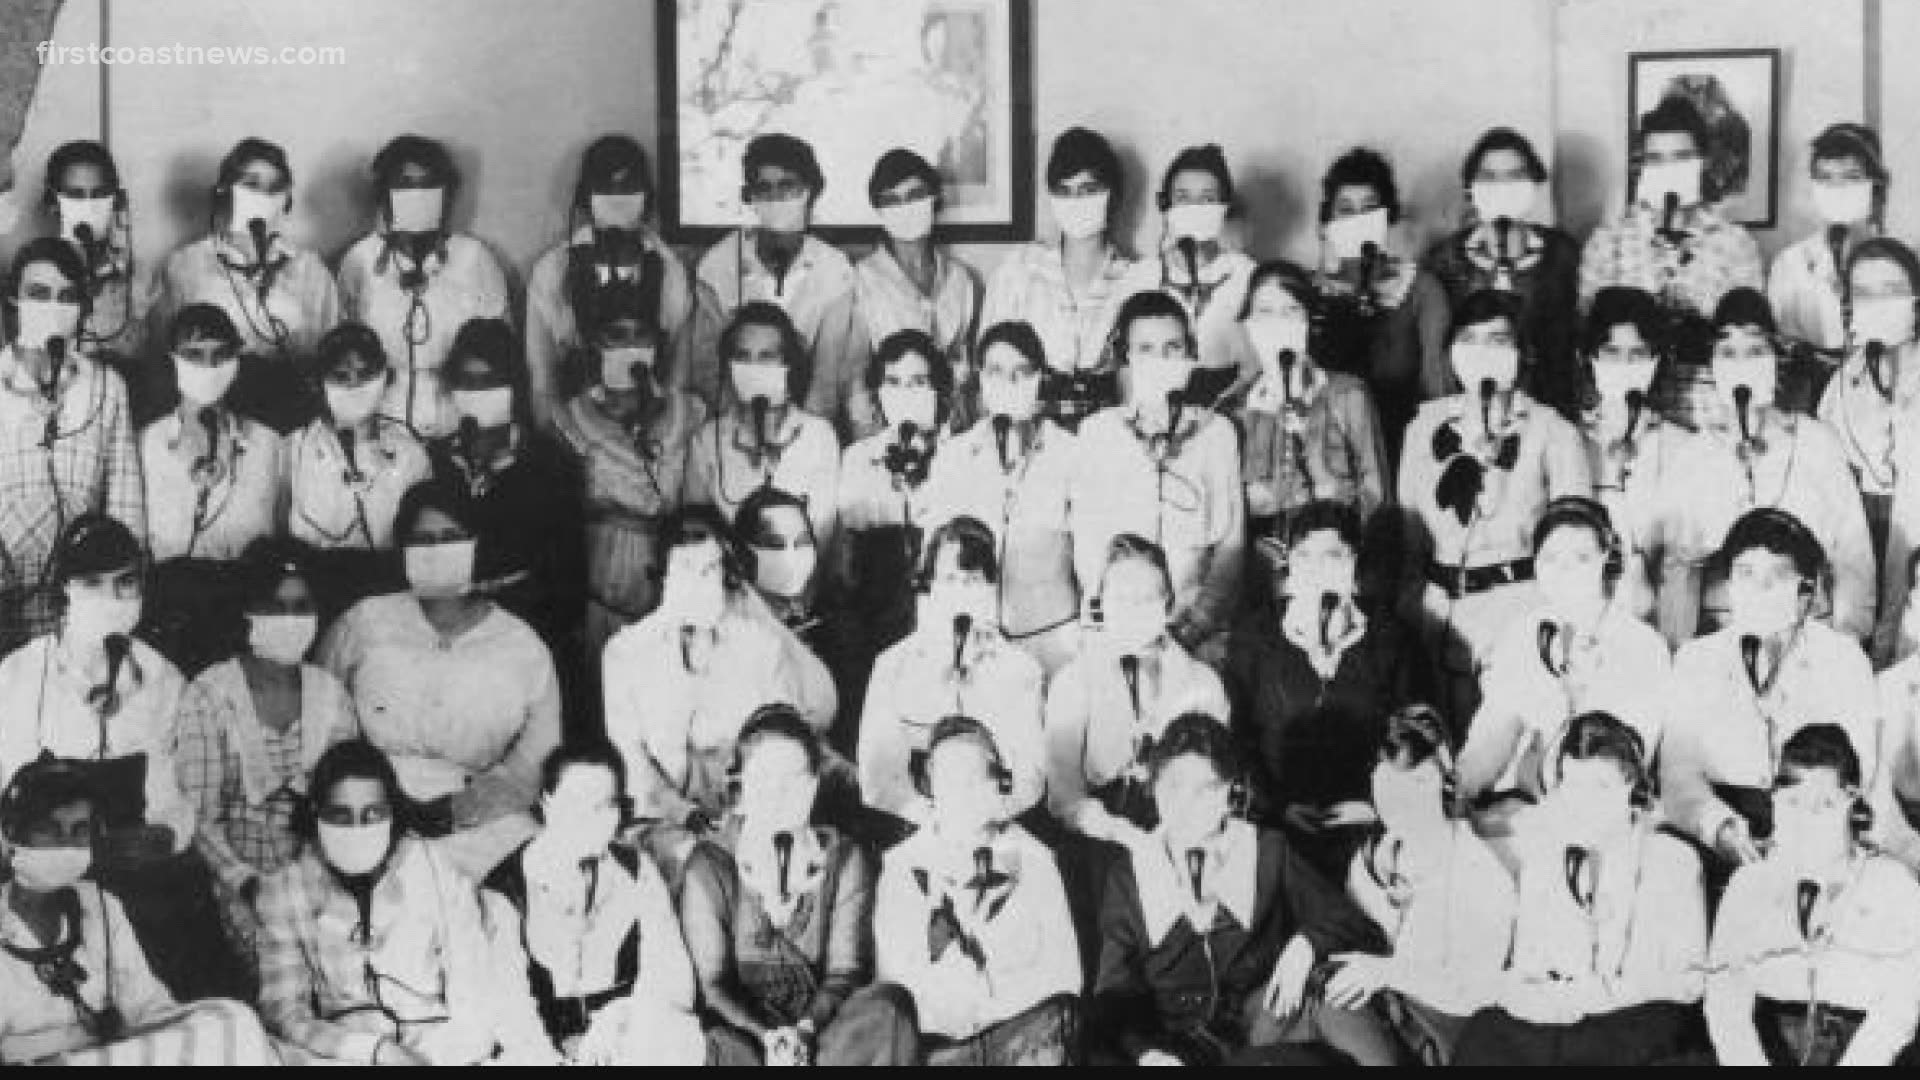 Face masks, closed schools, no large public gatherings back then and now.